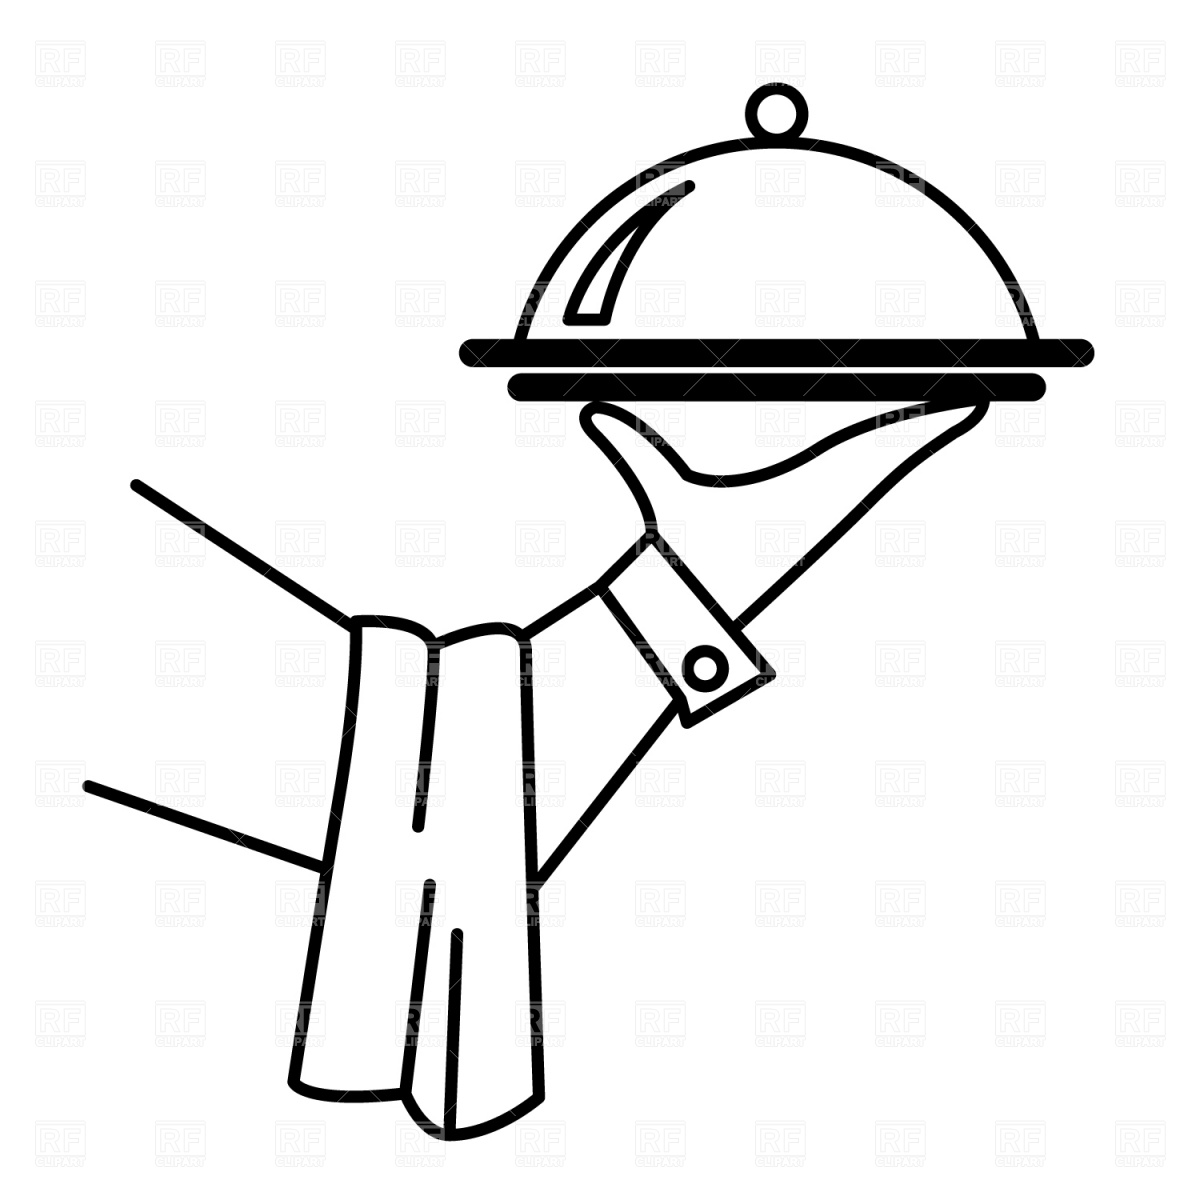 Waiter S Hand With Tray 1441 Food And Beverages Download Royalty    